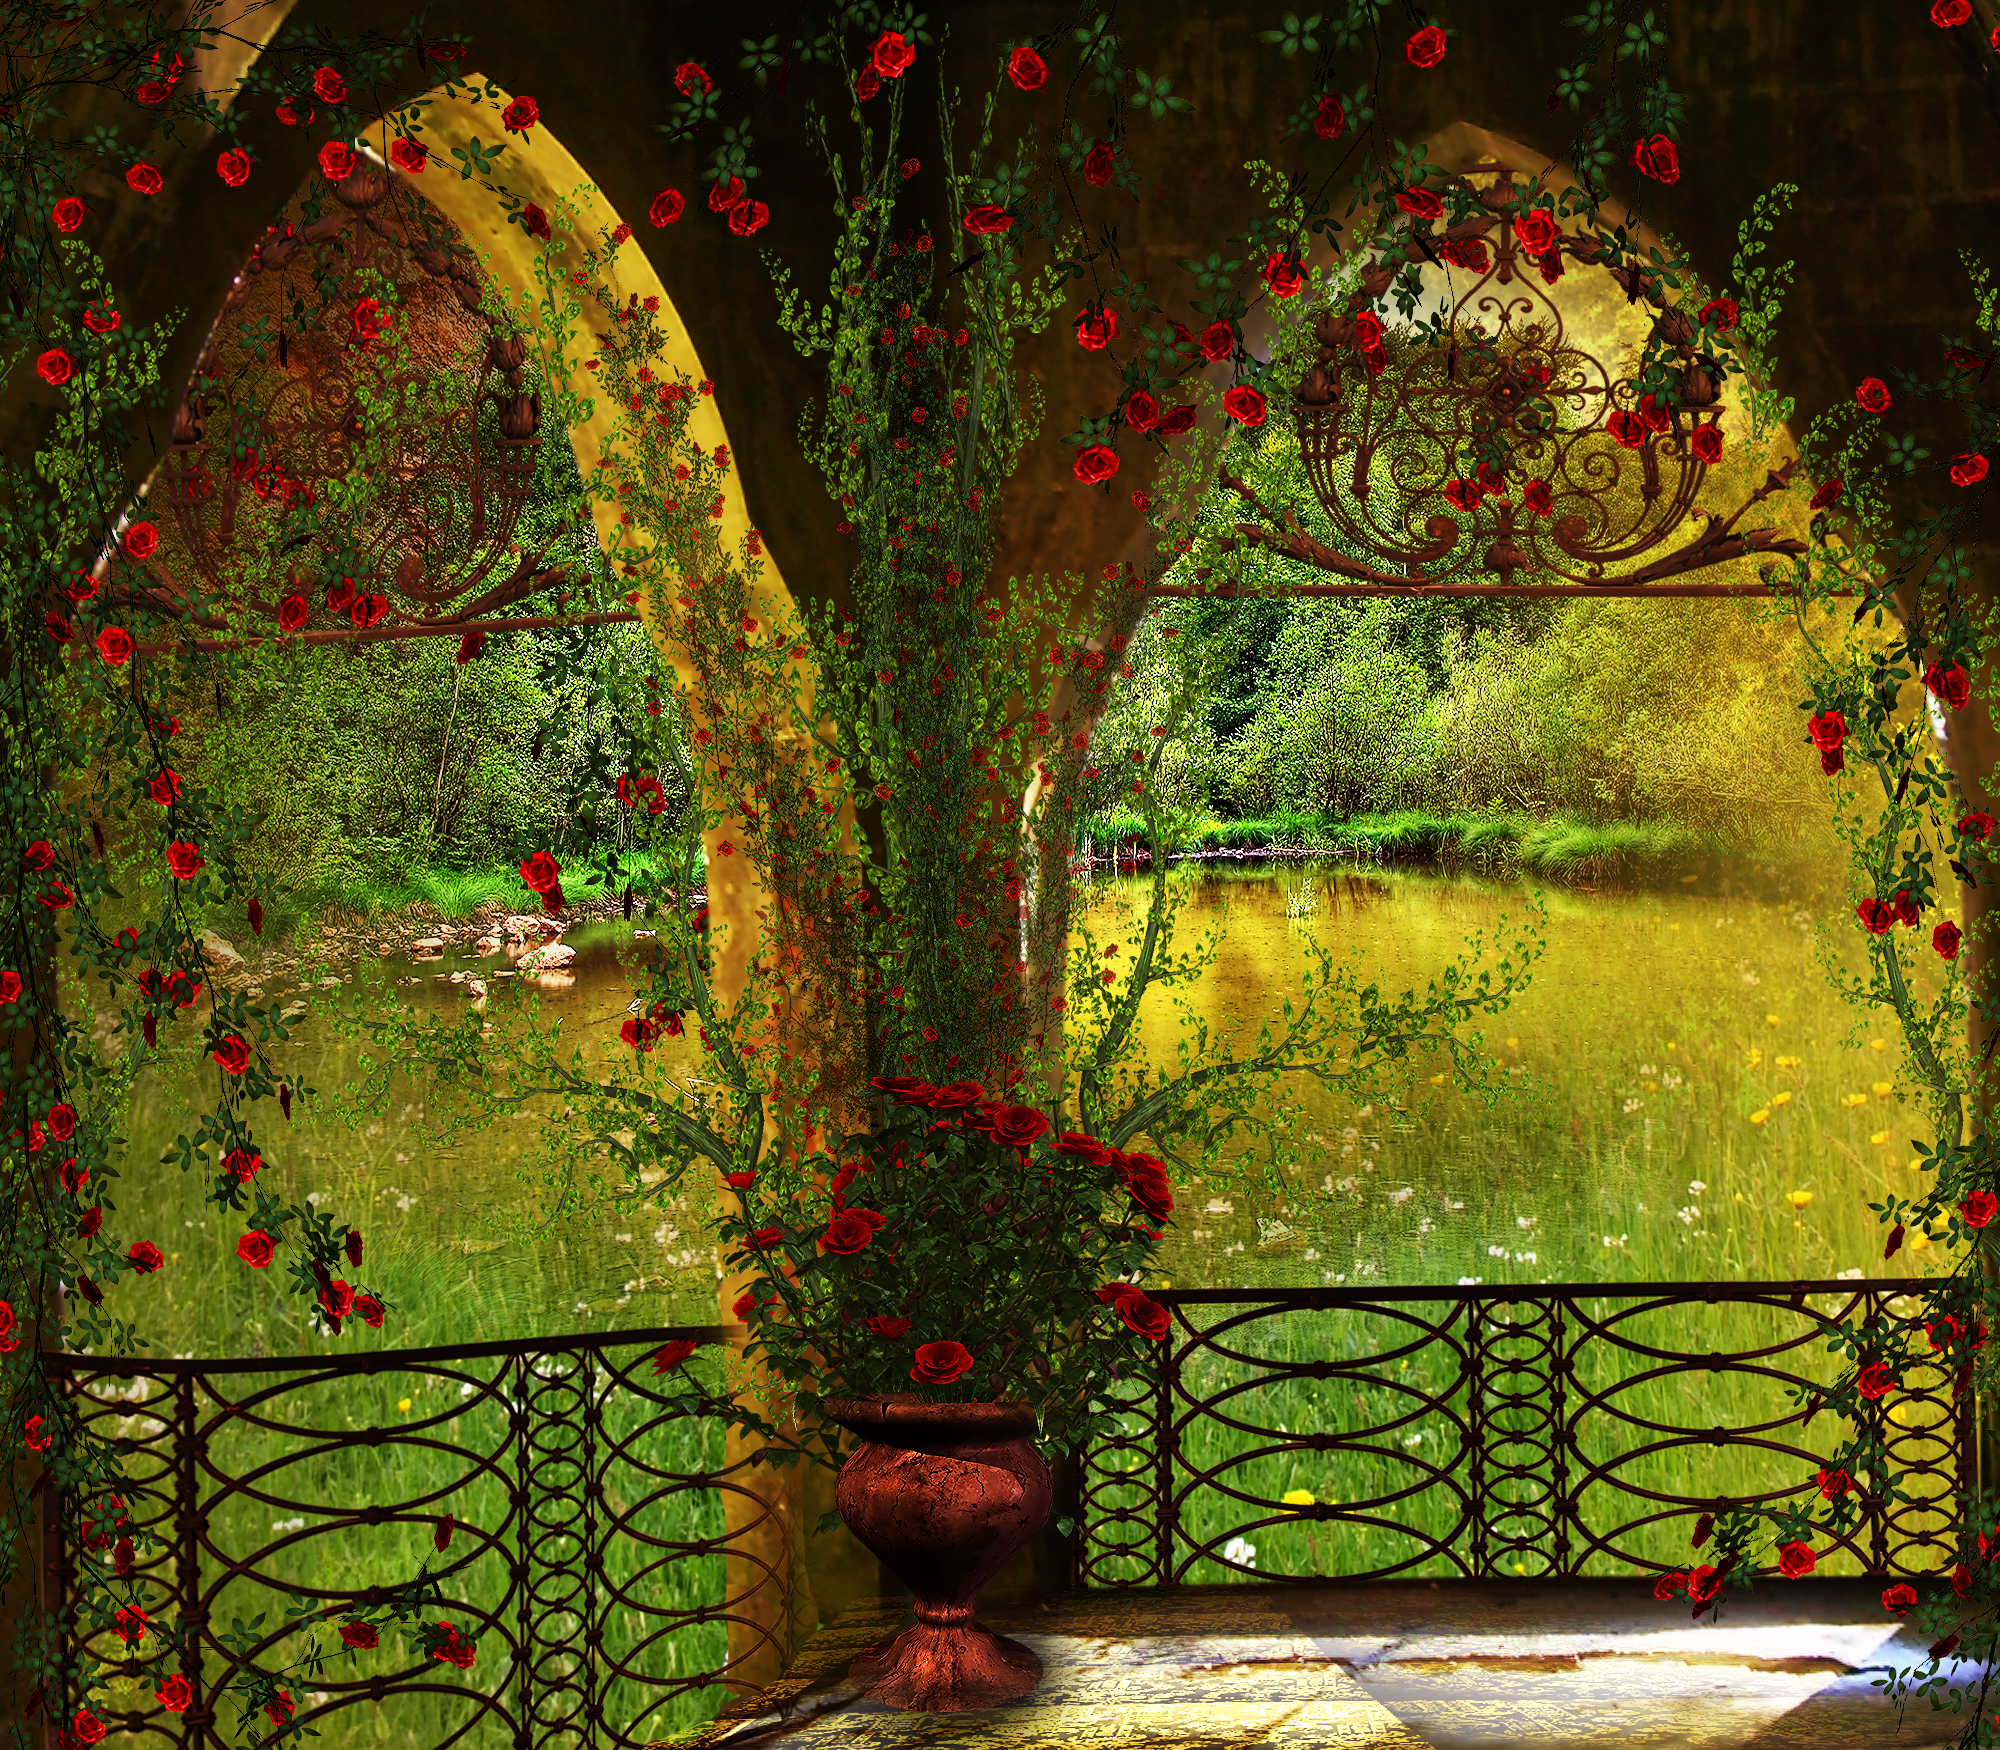 Red Rose Gazebo with Arches by sternenfee59